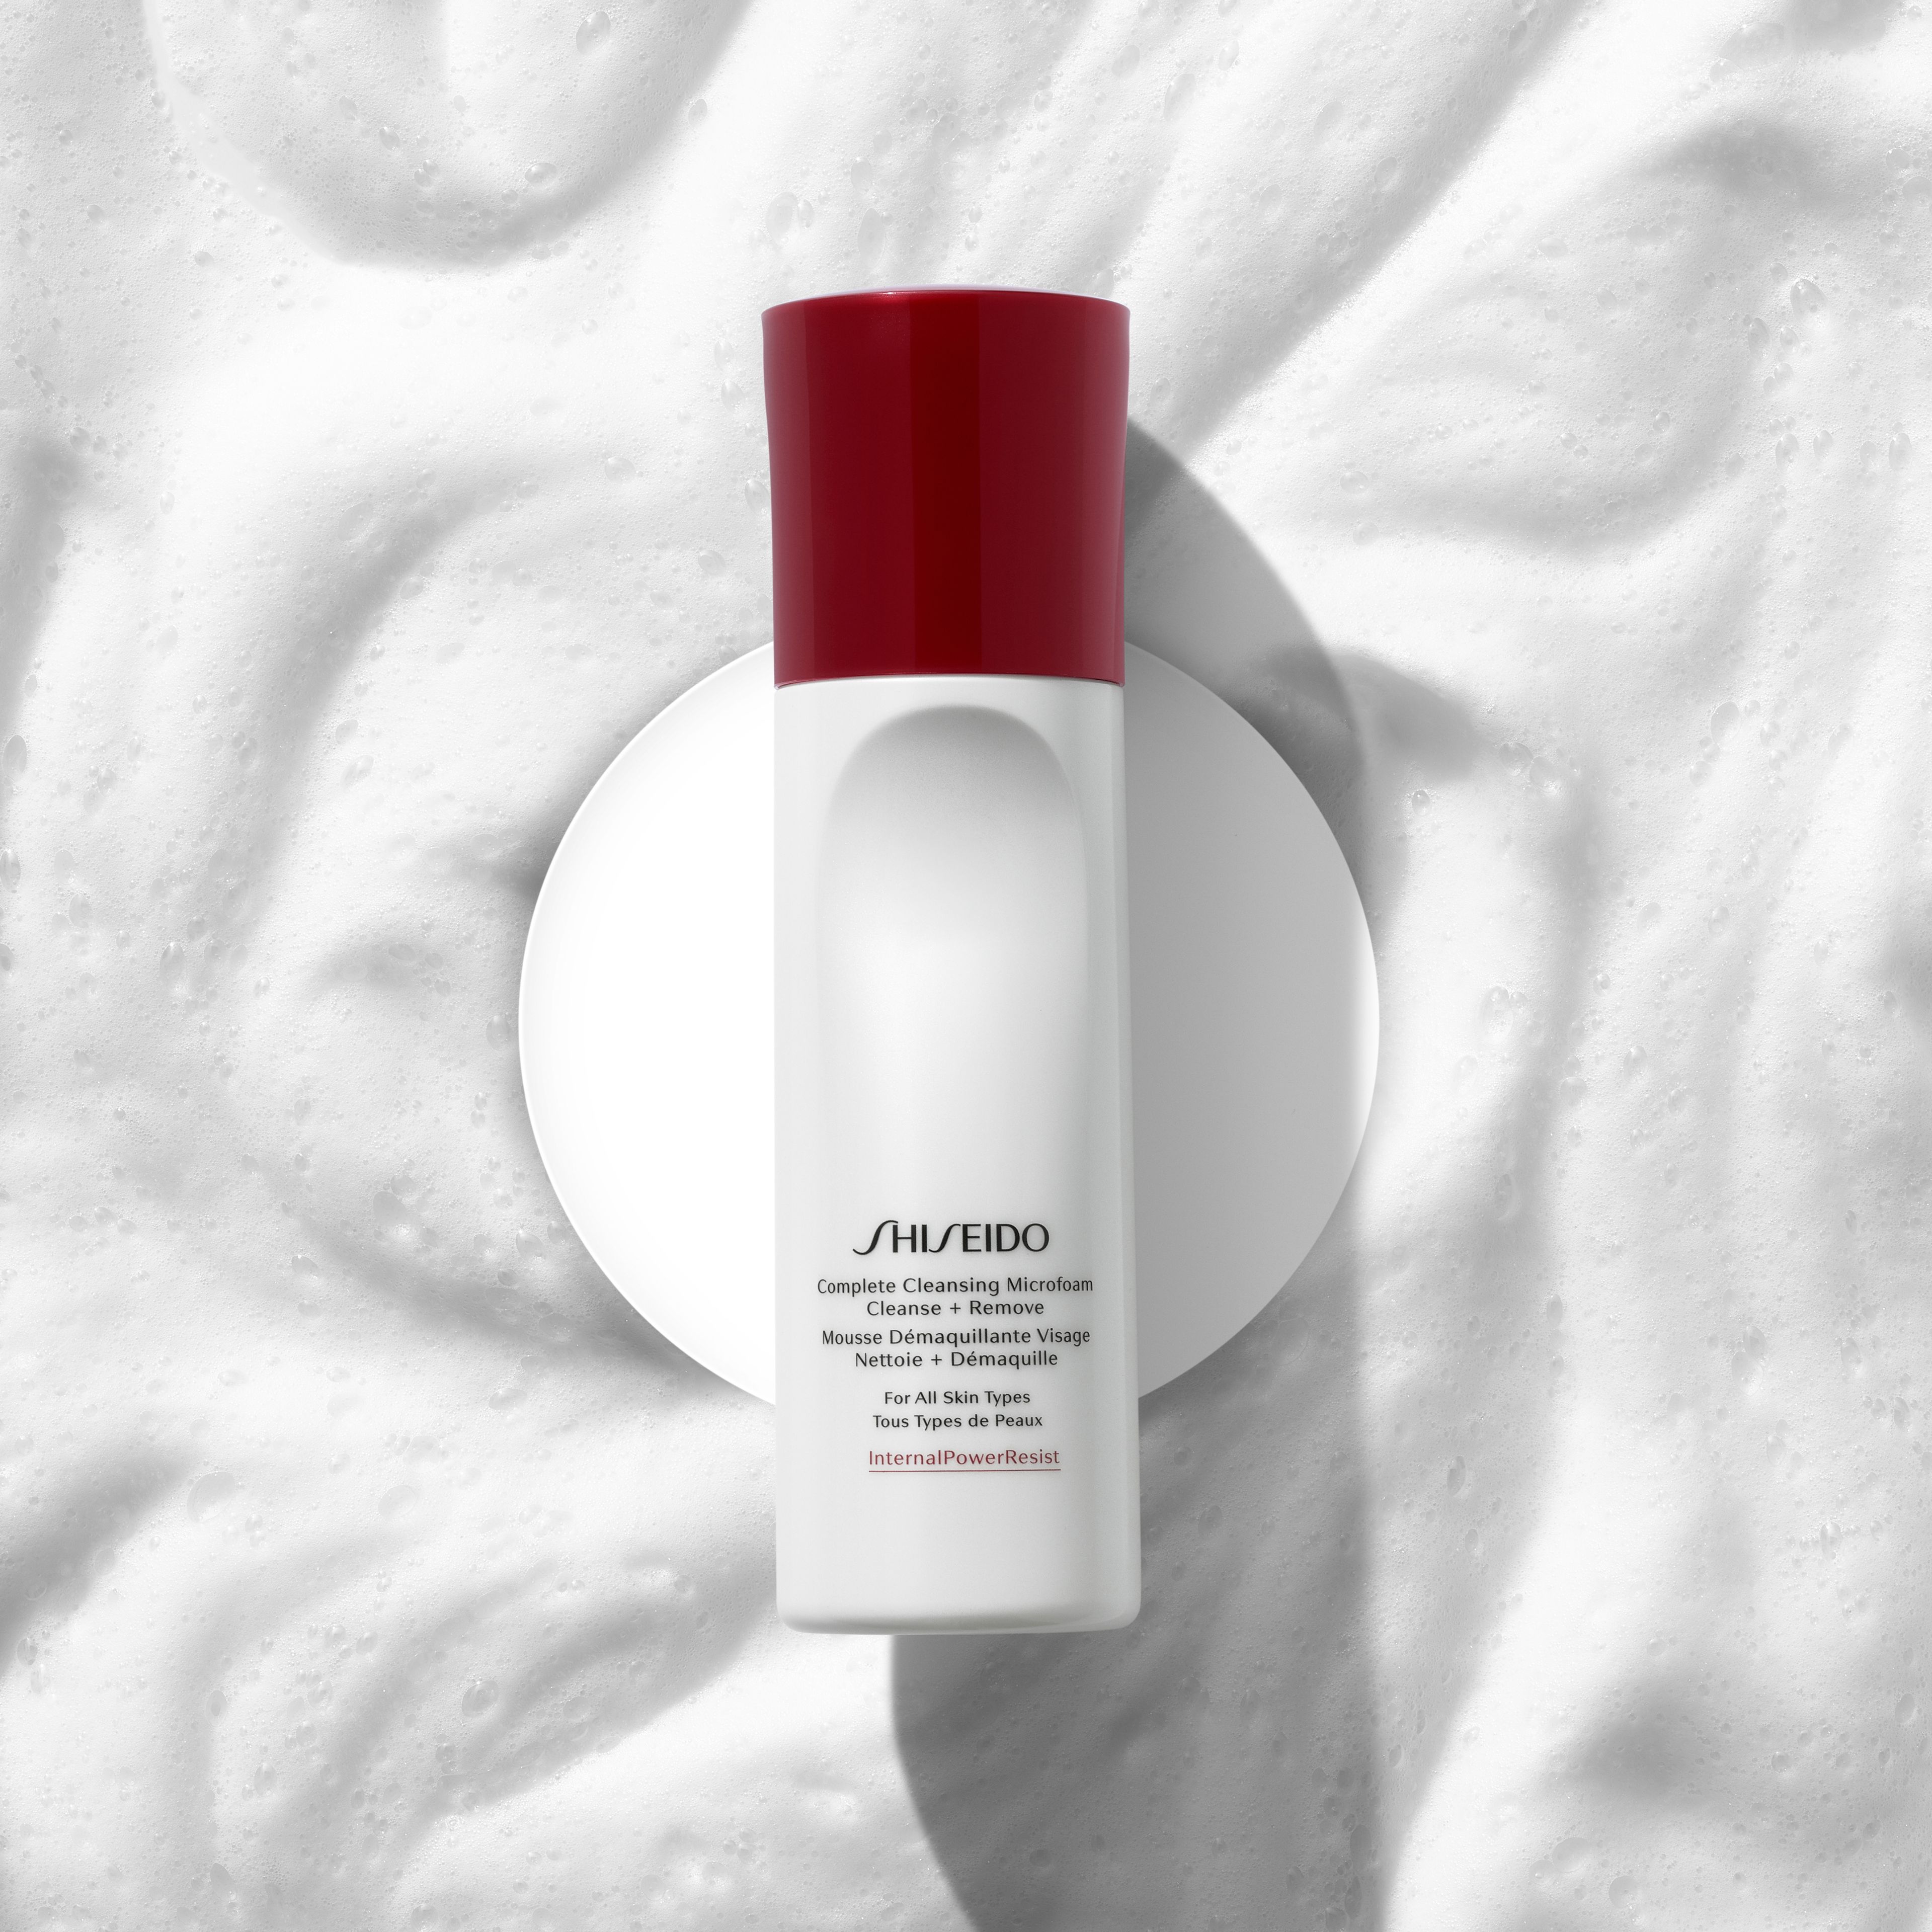 Shiseido Complete Cleansing Microfoam 3